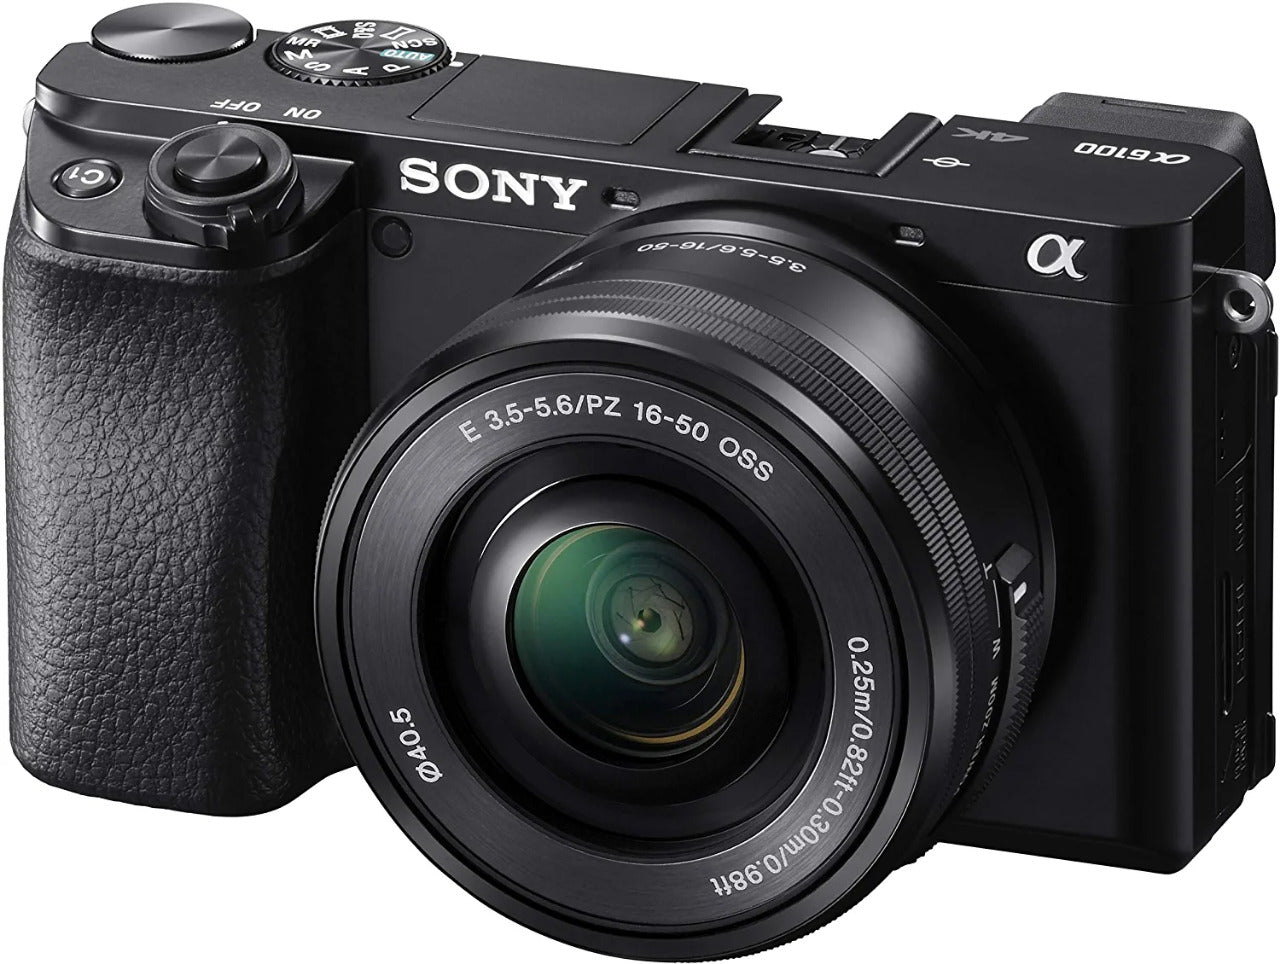 Sony Alpha 6100 APS-C camera with fast AF ILCE-6100/ILCE-6100L/ILCE-6100Y